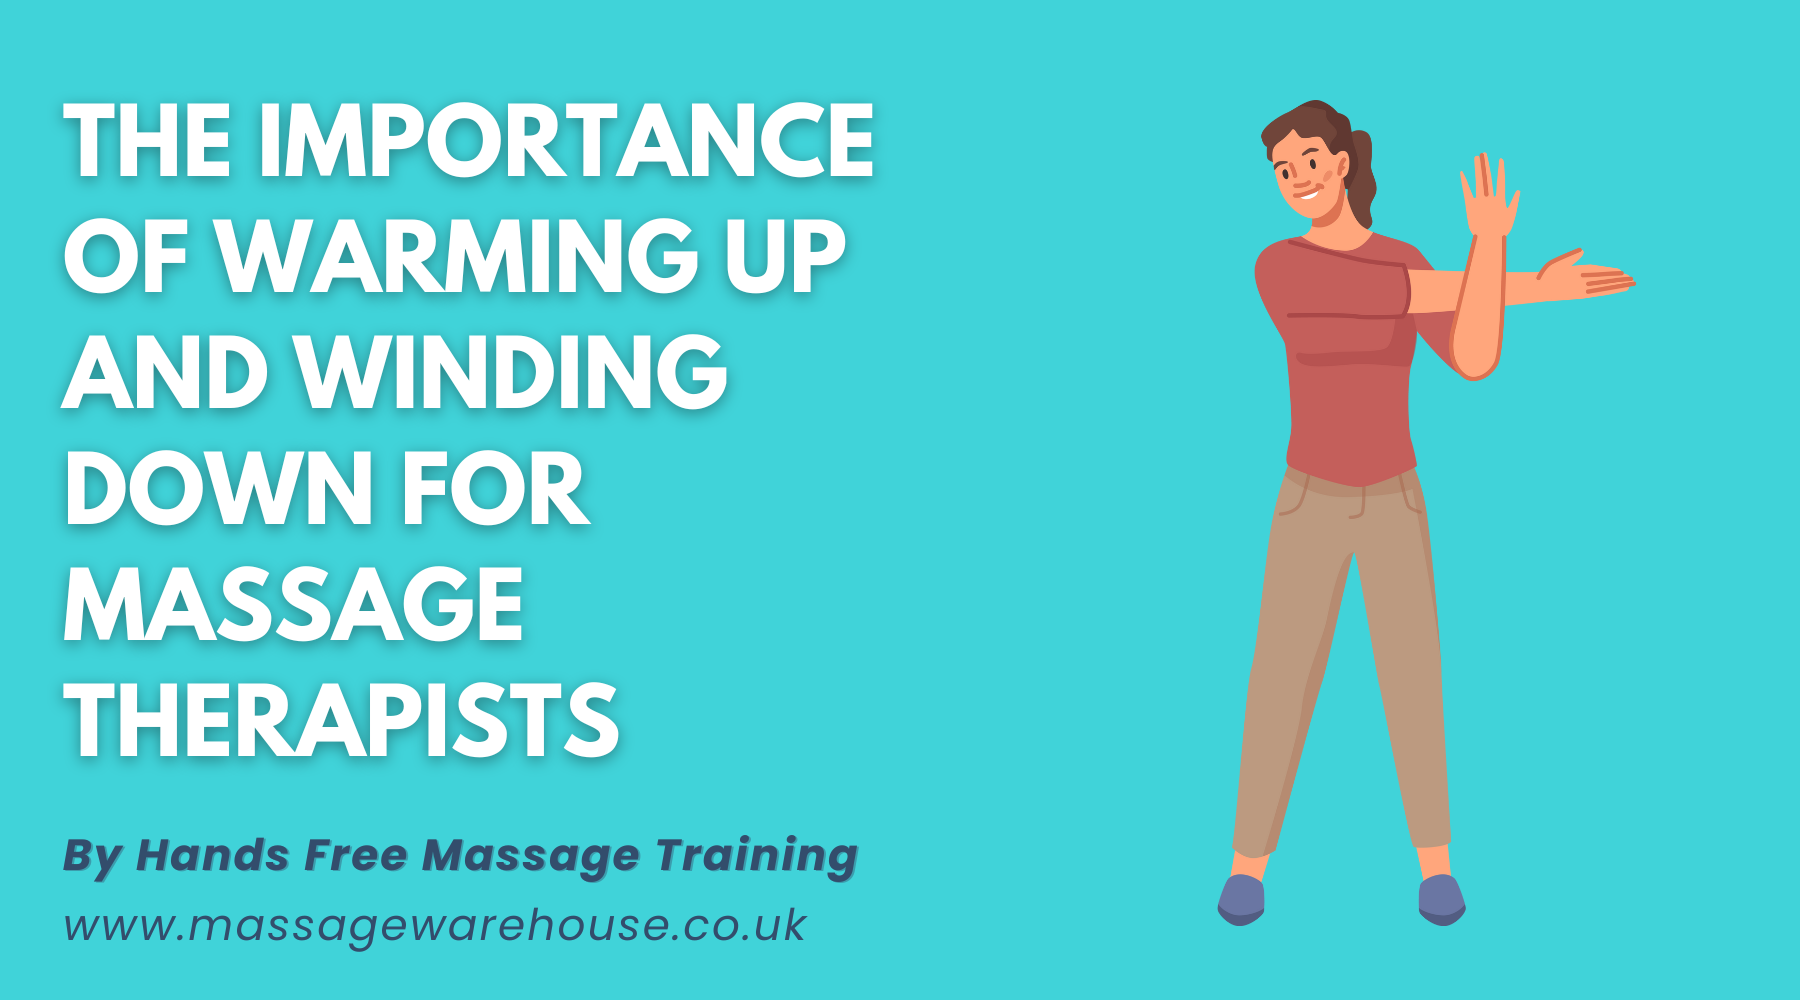 The Importance of Warming Up and Winding Down for Massage Therapists